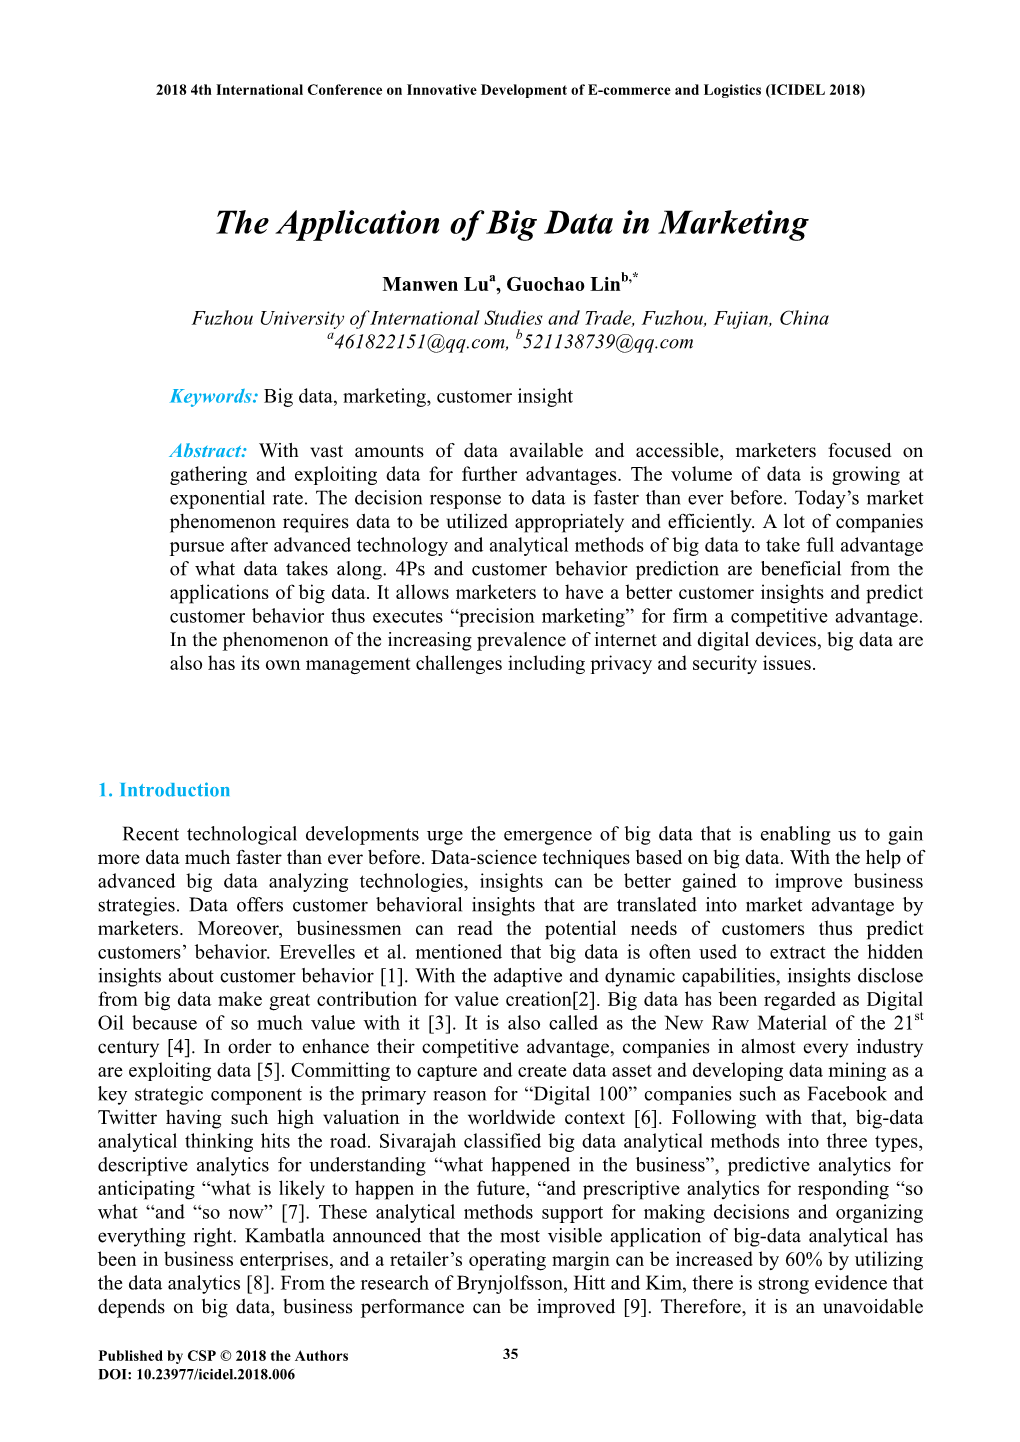 The Application of Big Data in Marketing